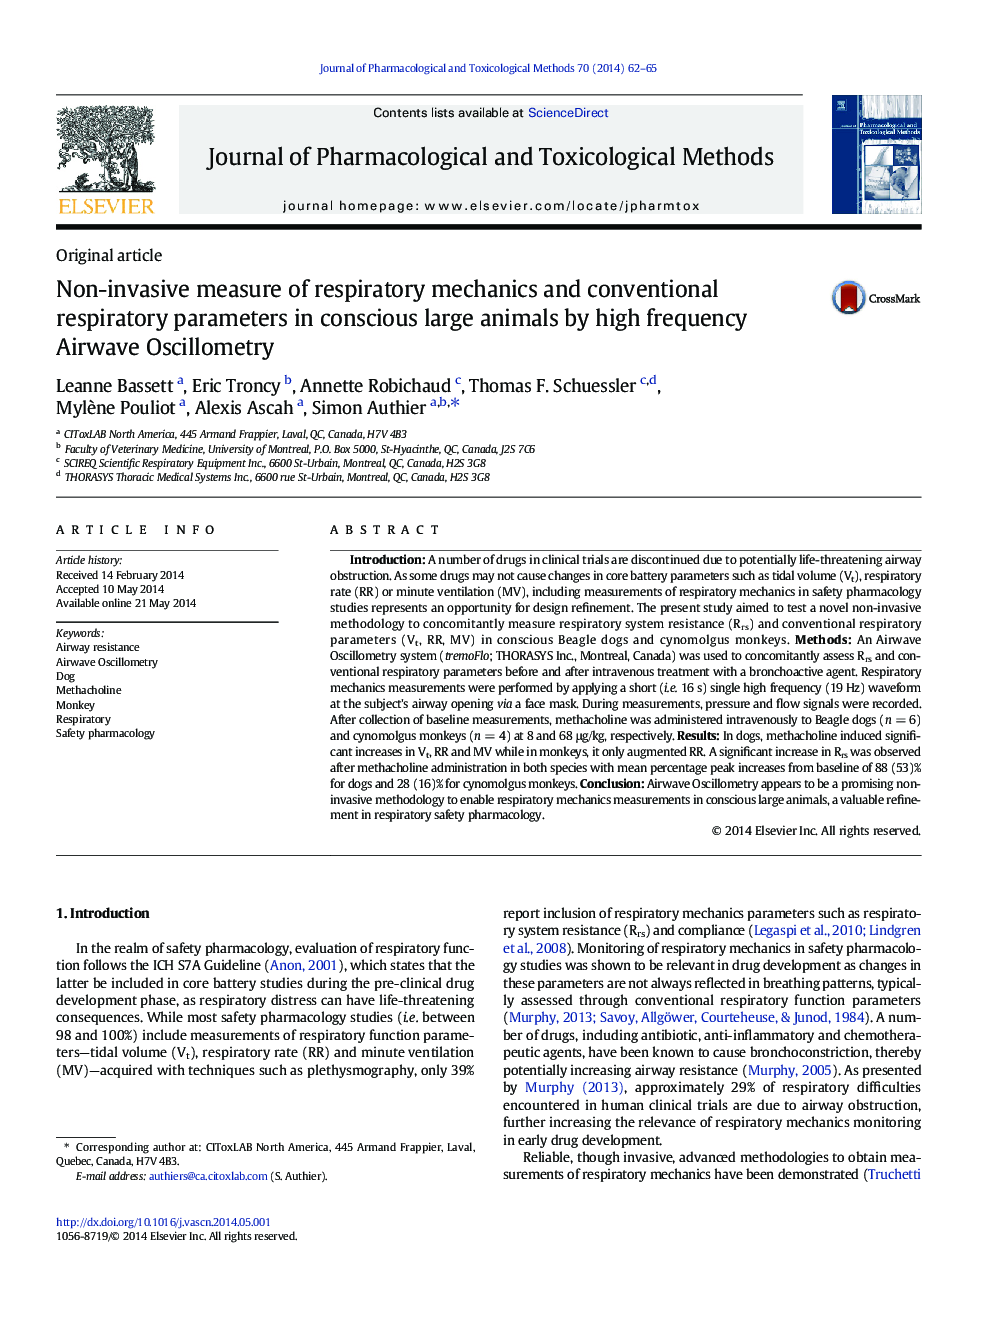 Non-invasive measure of respiratory mechanics and conventional respiratory parameters in conscious large animals by high frequency Airwave Oscillometry